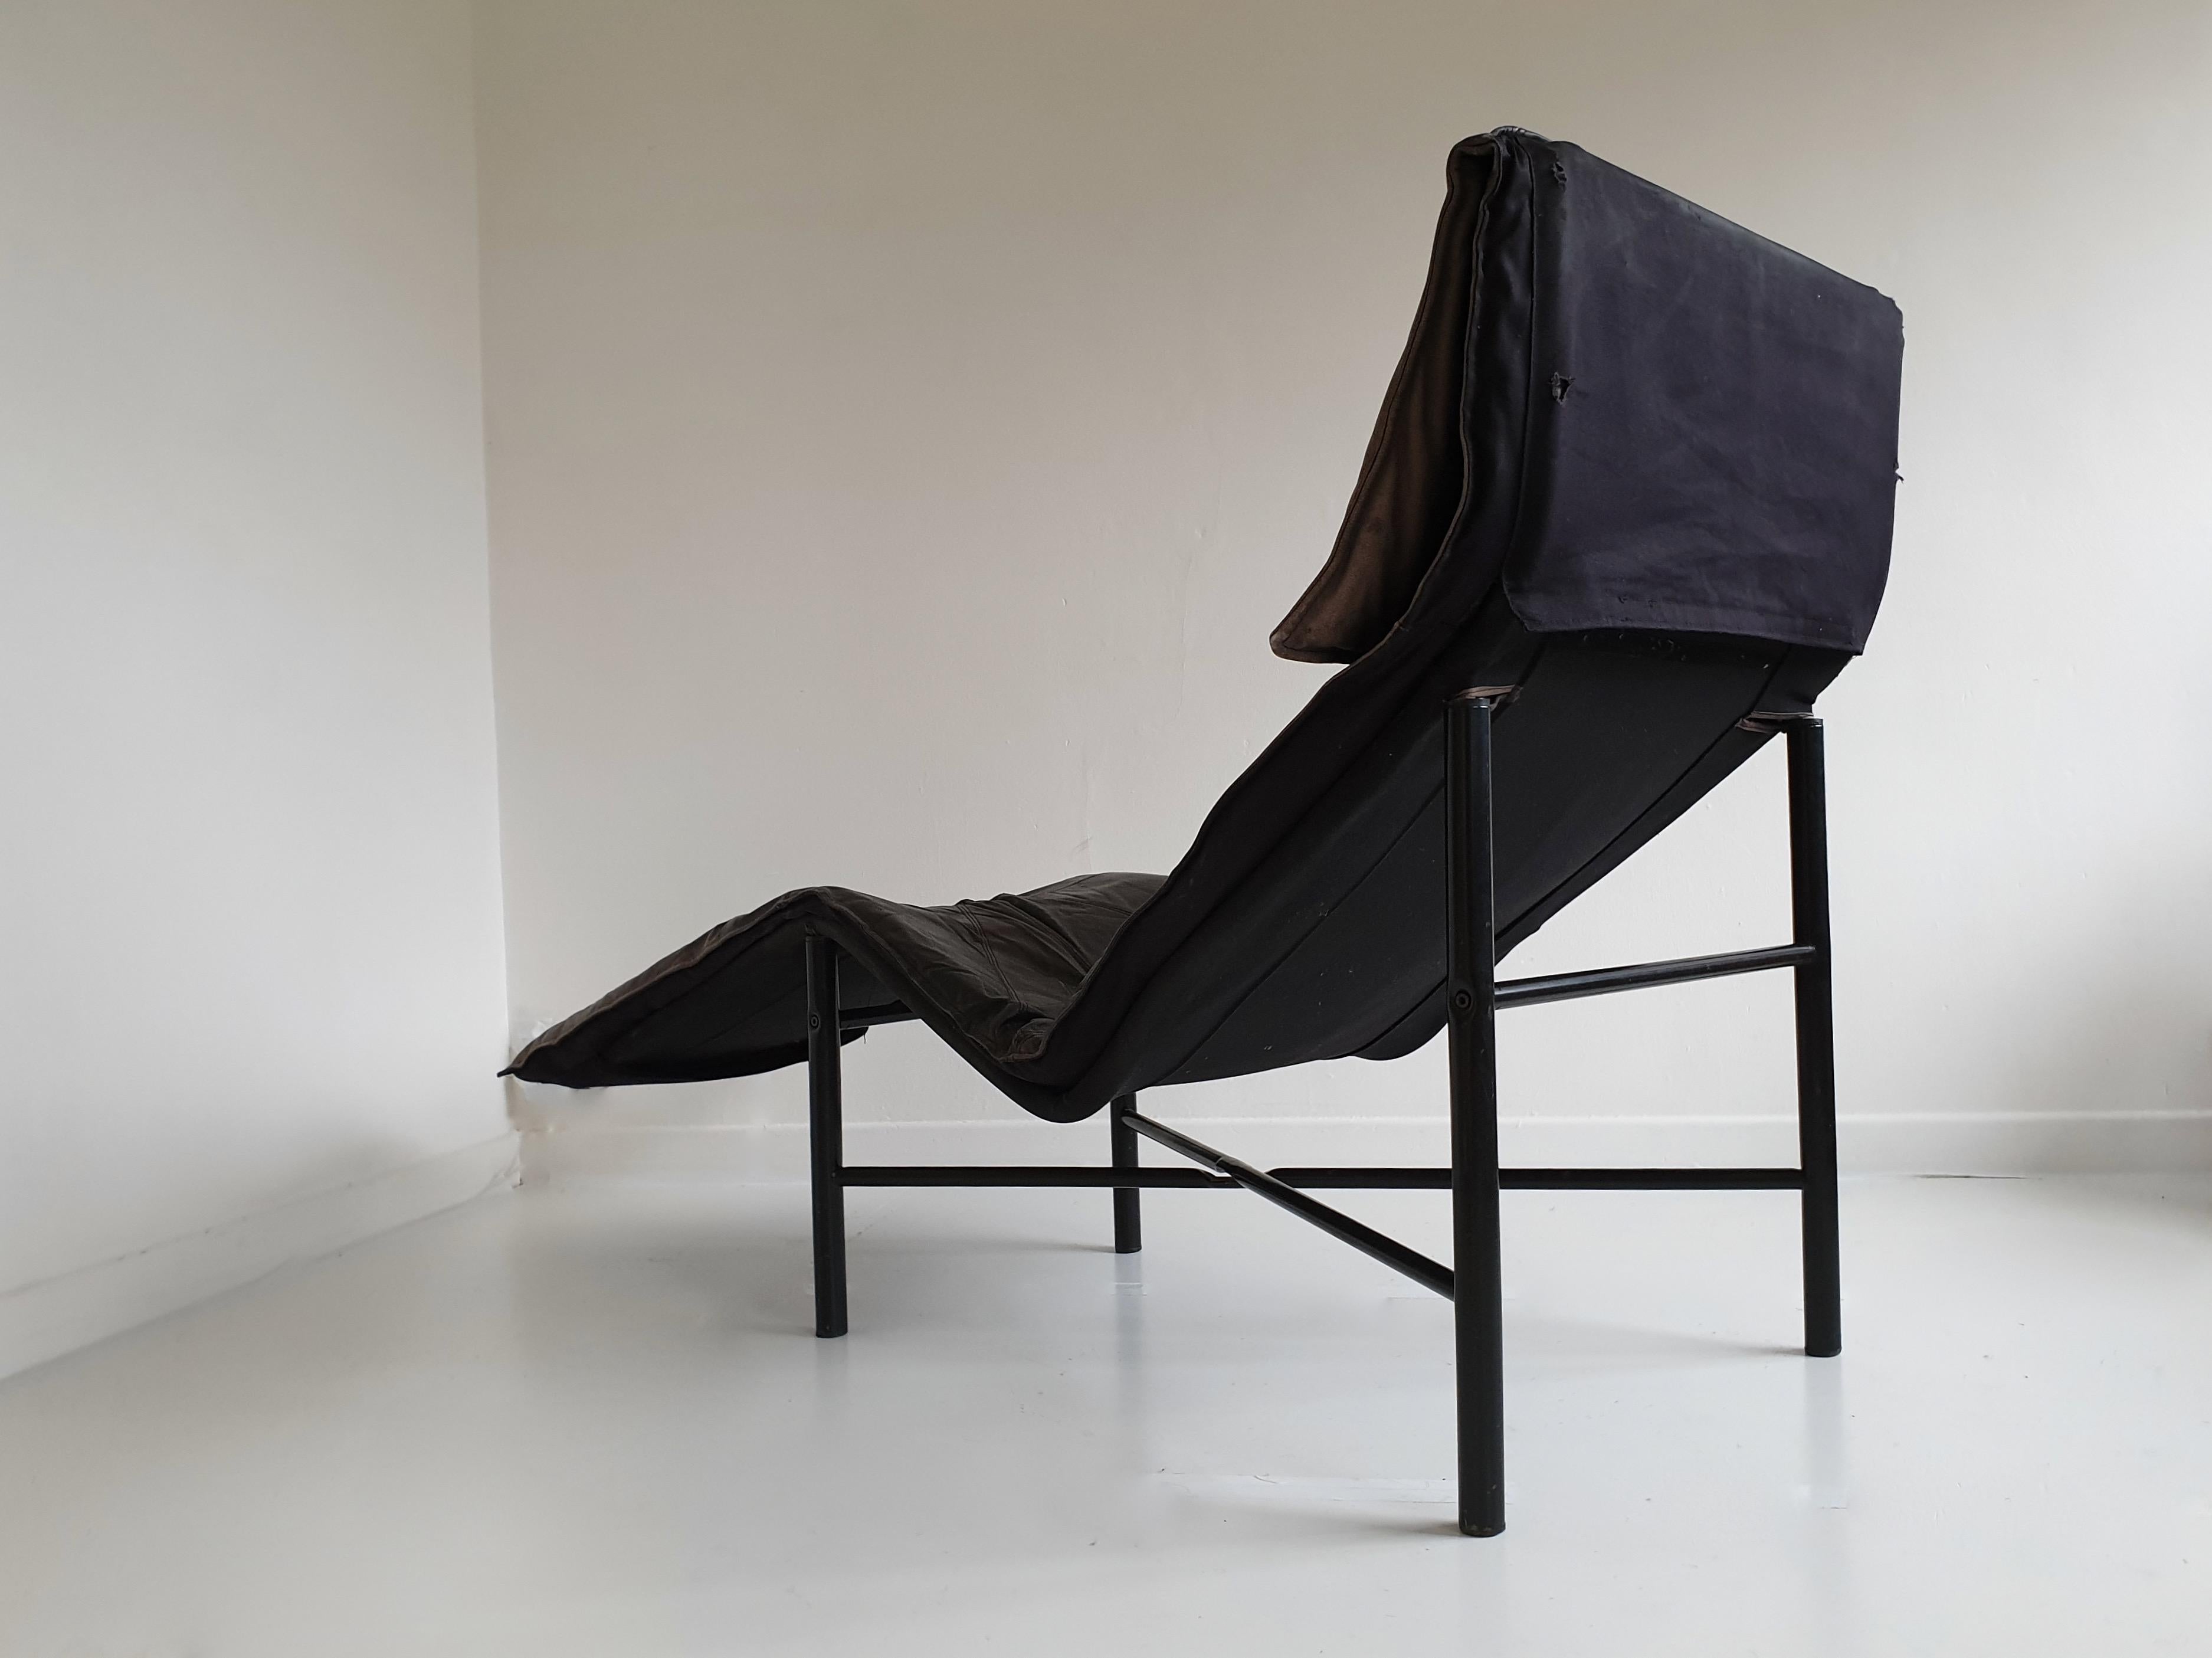 Swedish Brown Leather 'Skye' Chaise by Tord Björklund for Ikea, circa 1980